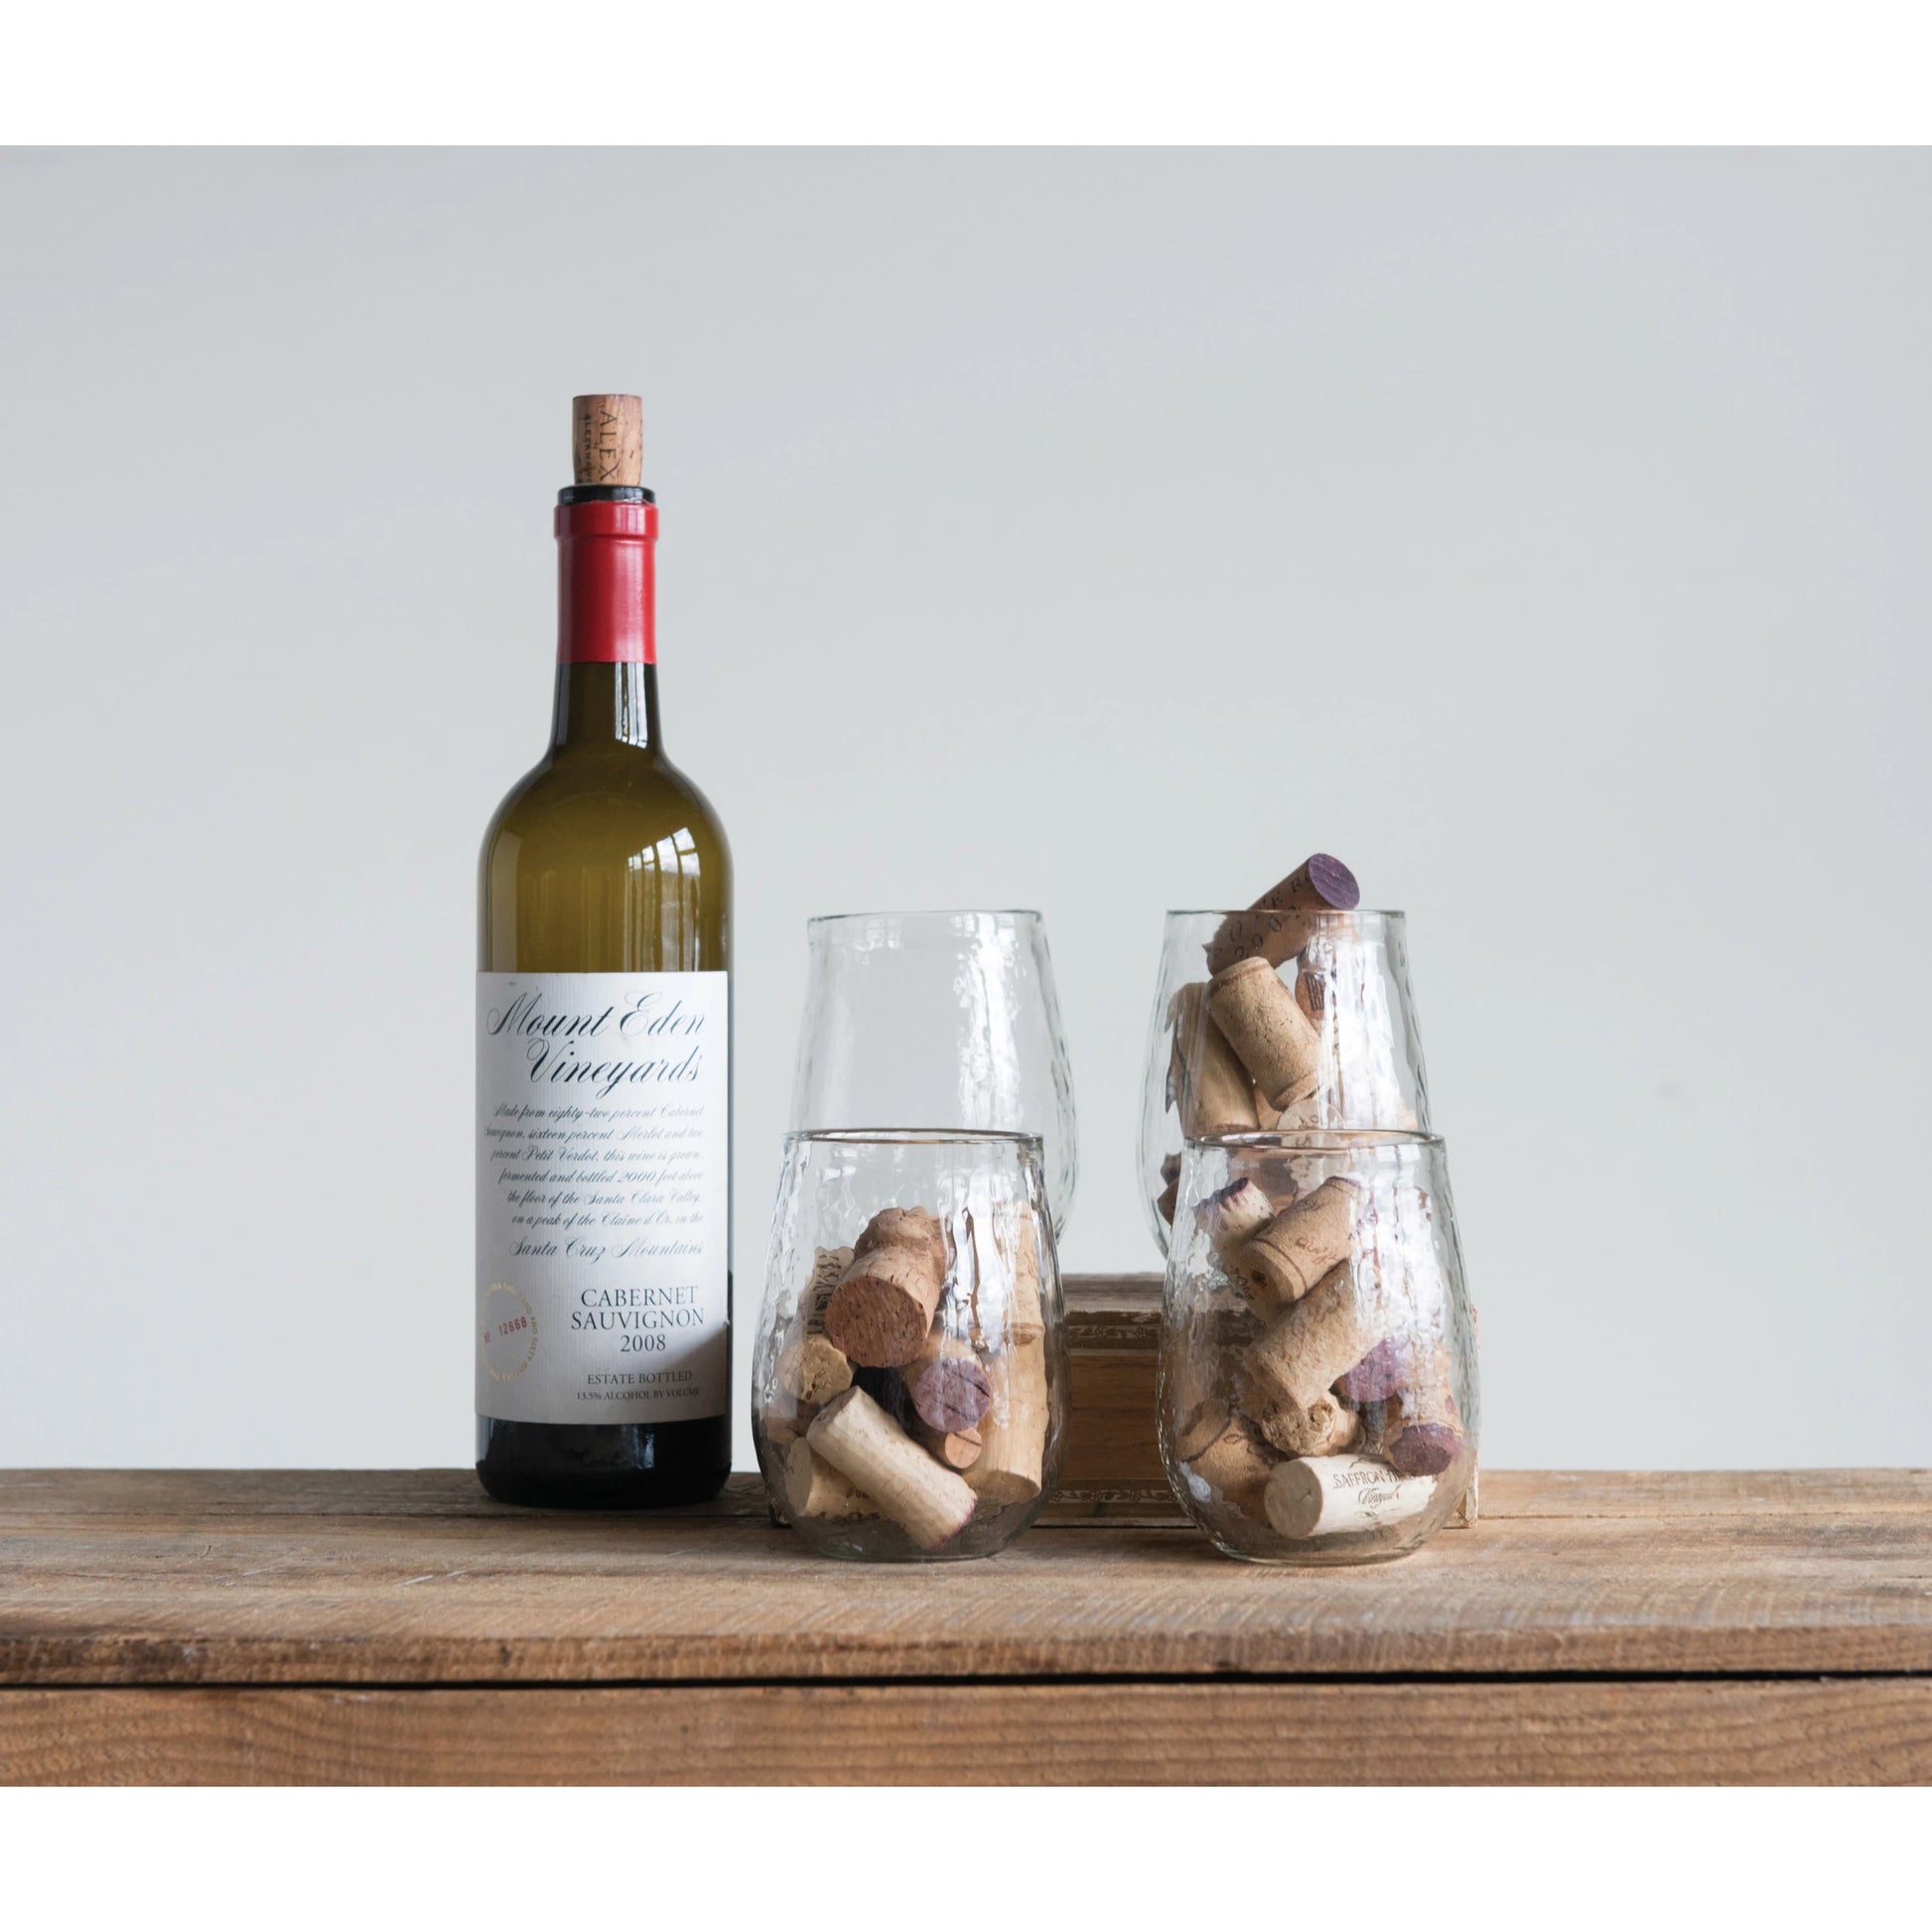 four recycled glass stemless wine glasses displayed with corks inside next to a wine bottle on a rustic wooden surface against a light blue background